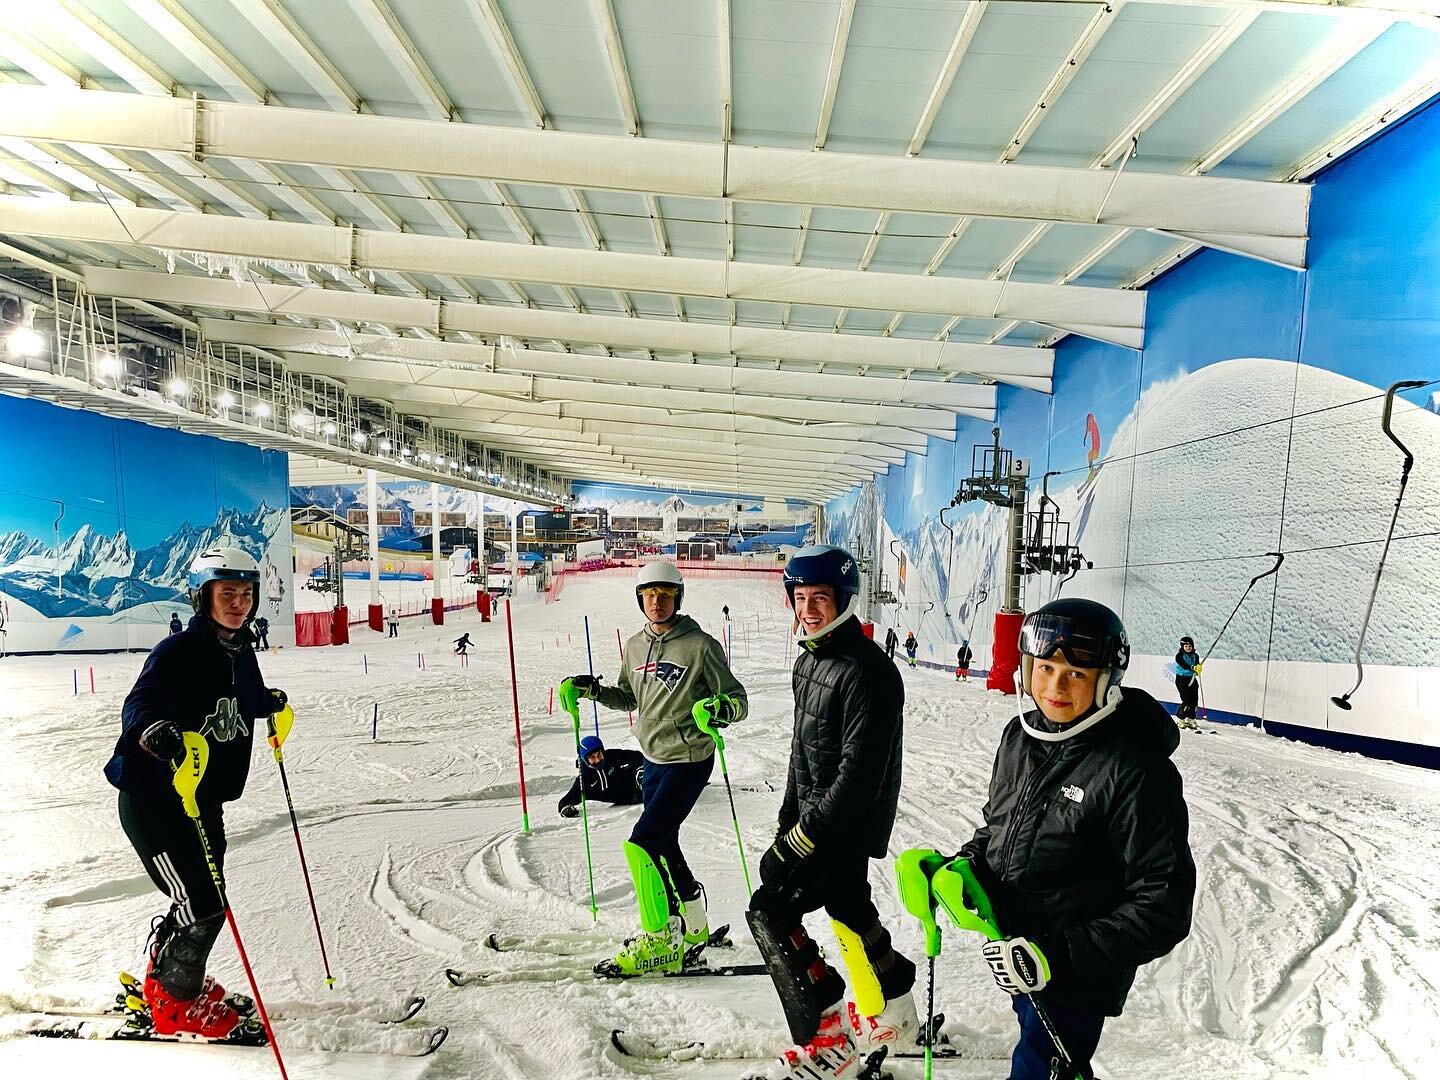 10 days till our next indoor session at Hemel Snow Centre! Only a few spaces available so if you would like to join us please book ASAP to secure you spot ⛷😎 

We have some extra sessions at ChillFactore, Manchester being announced very soon so stay